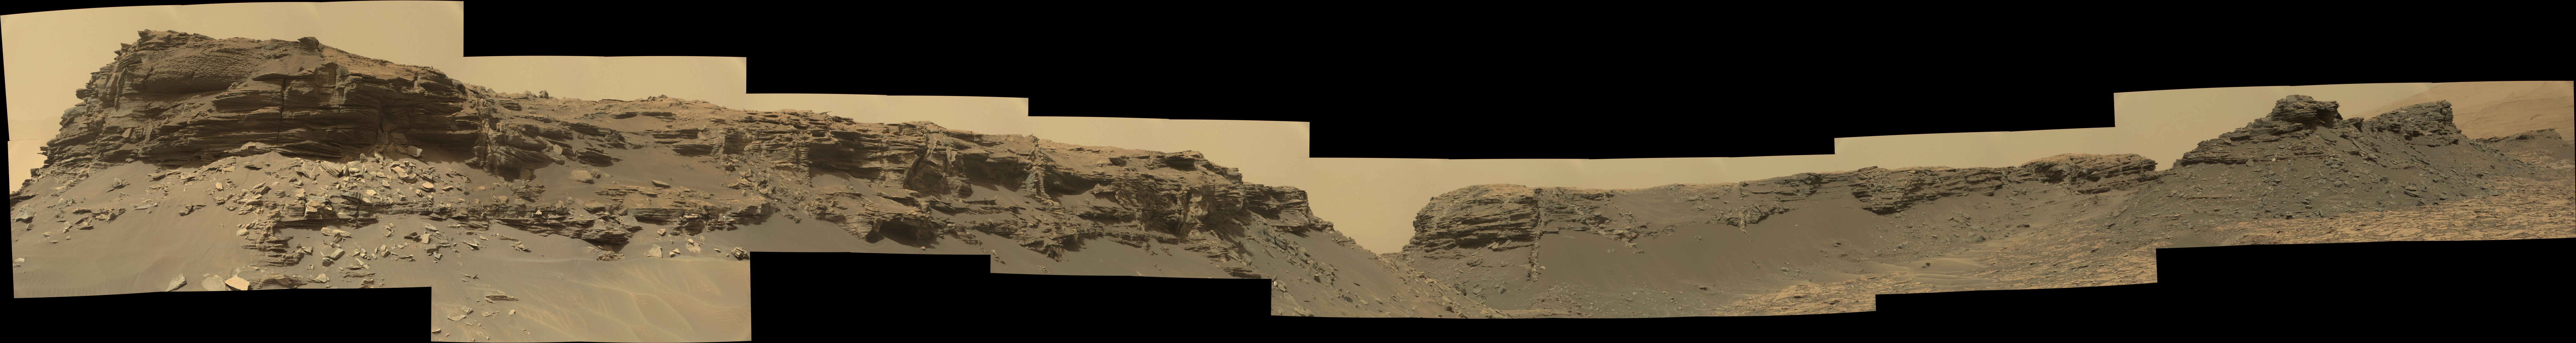 panoramic-curiosity-rover-view-2-sol-1454-was-life-on-mars